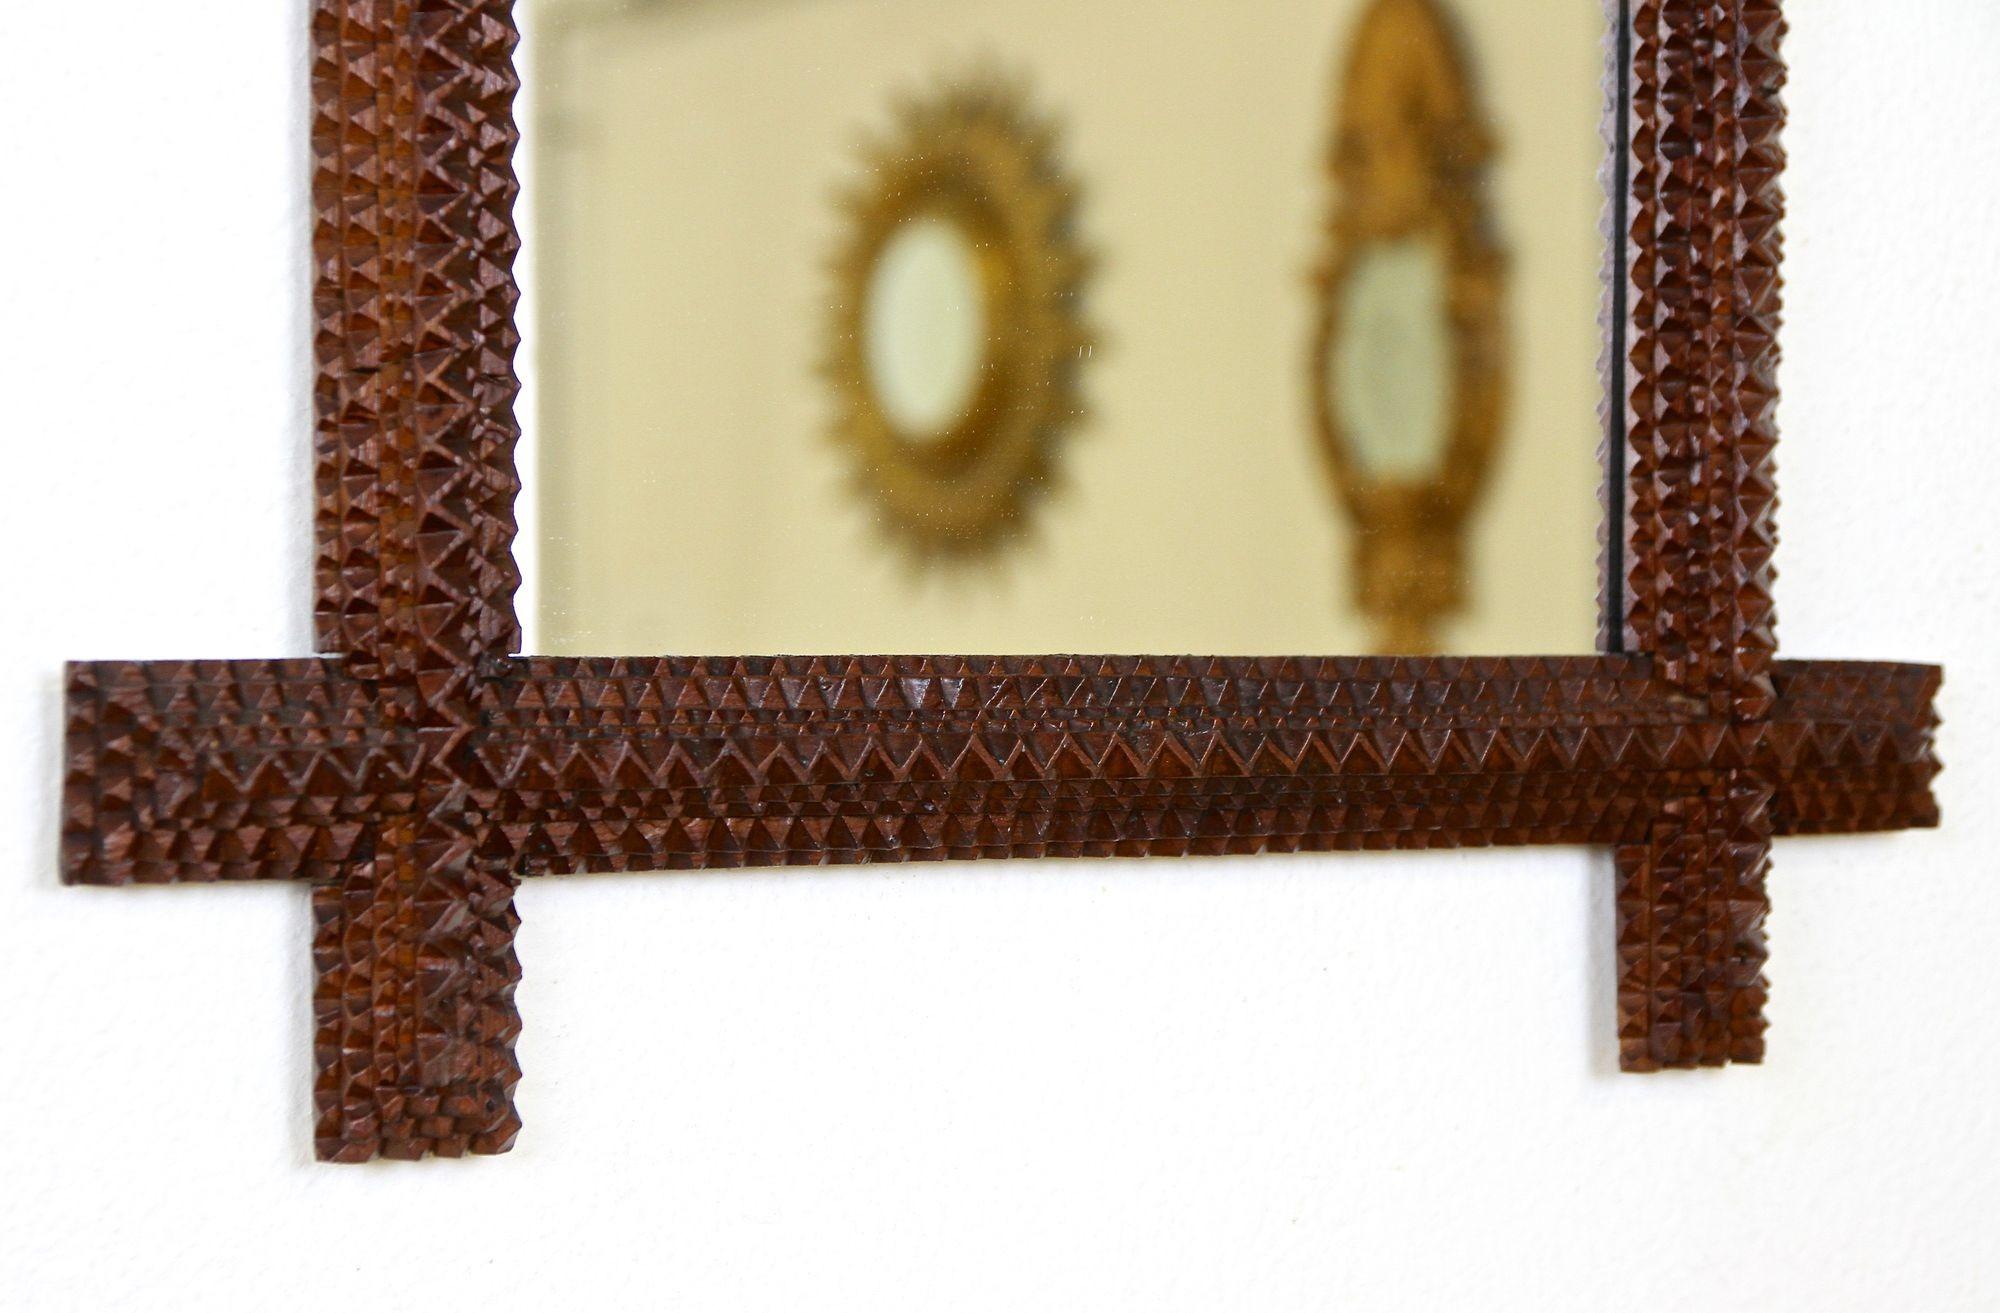 Rustic Tramp Art Wall Mirror with Chip Carvings, Austria circa 1880 For Sale 2